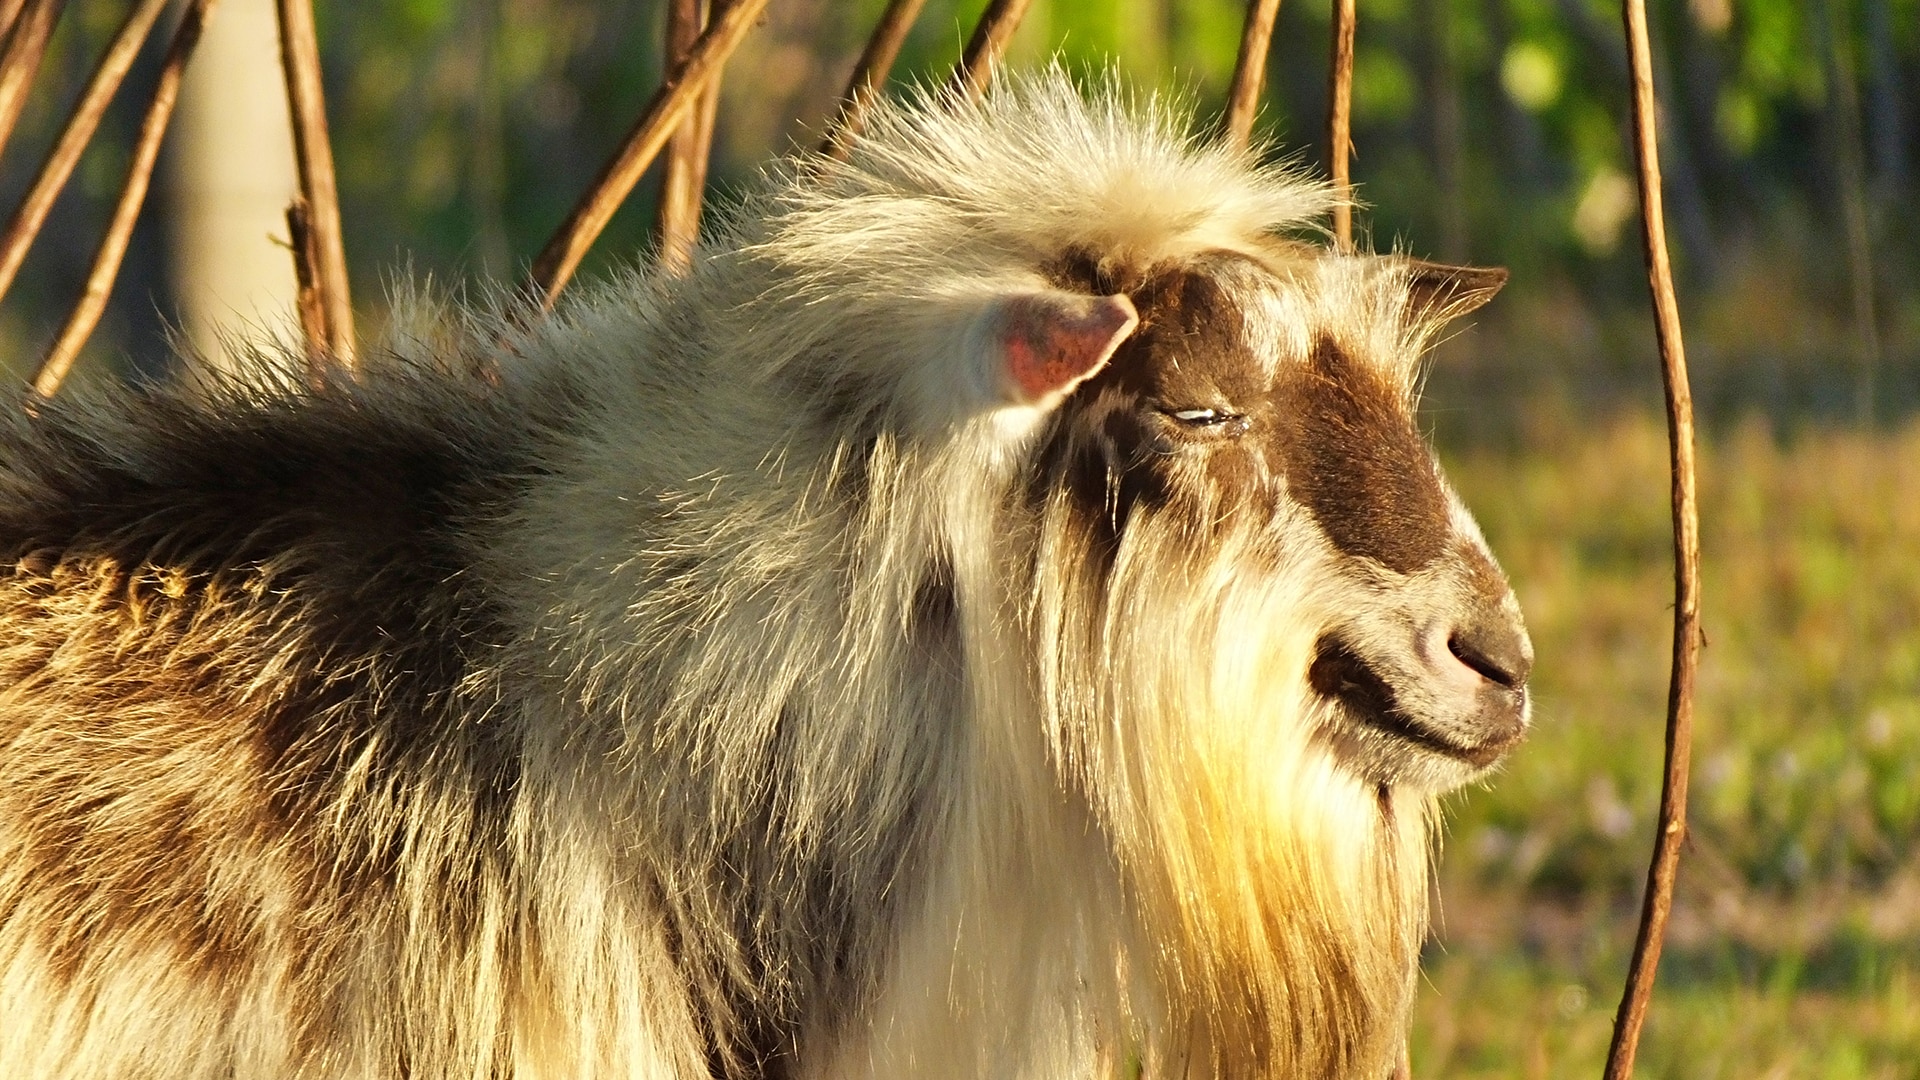 Profile of a Tennessee Fainting Goat in a Florida field